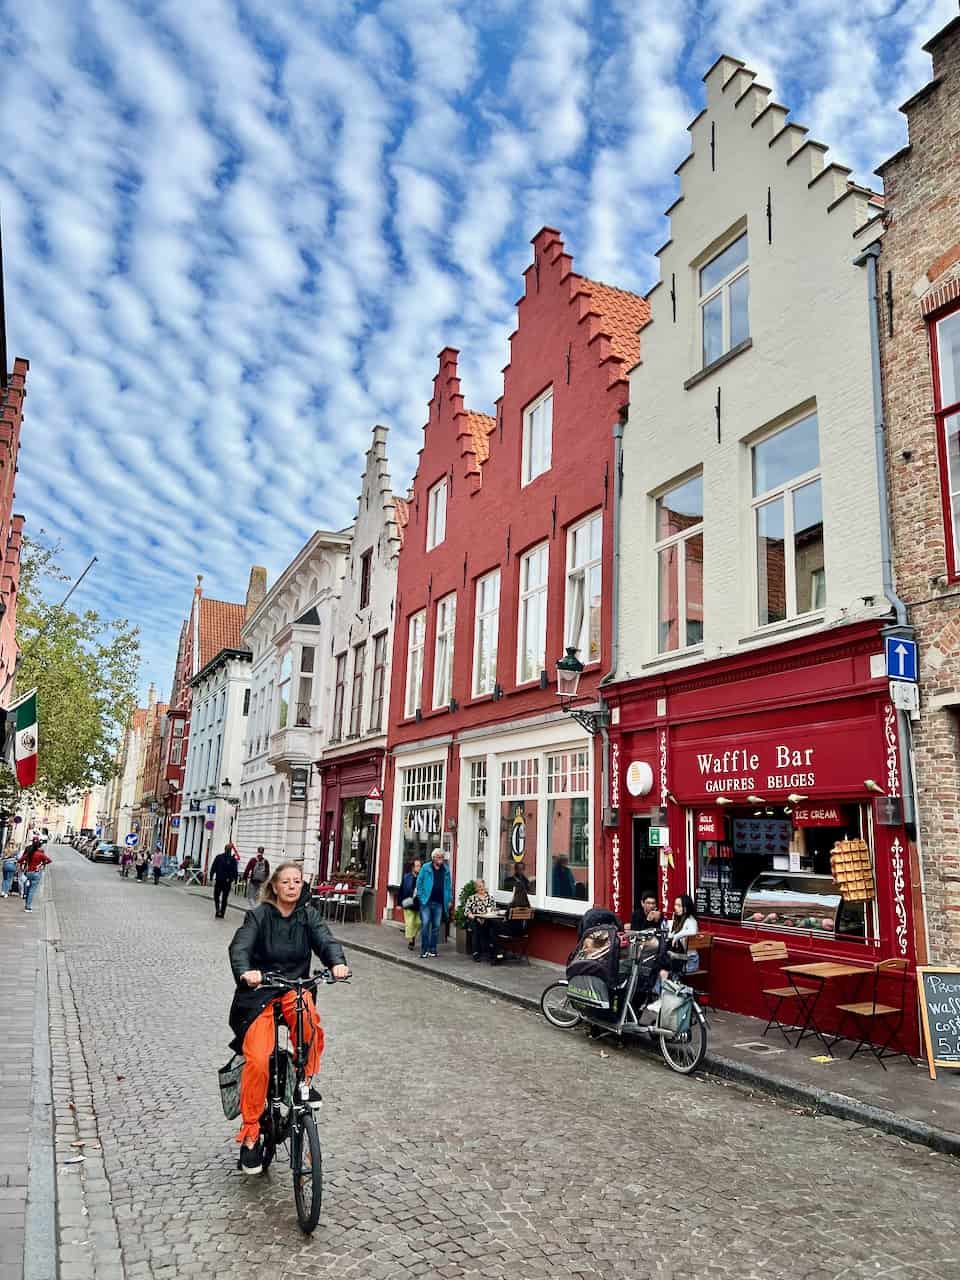 where to take best photos in bruges